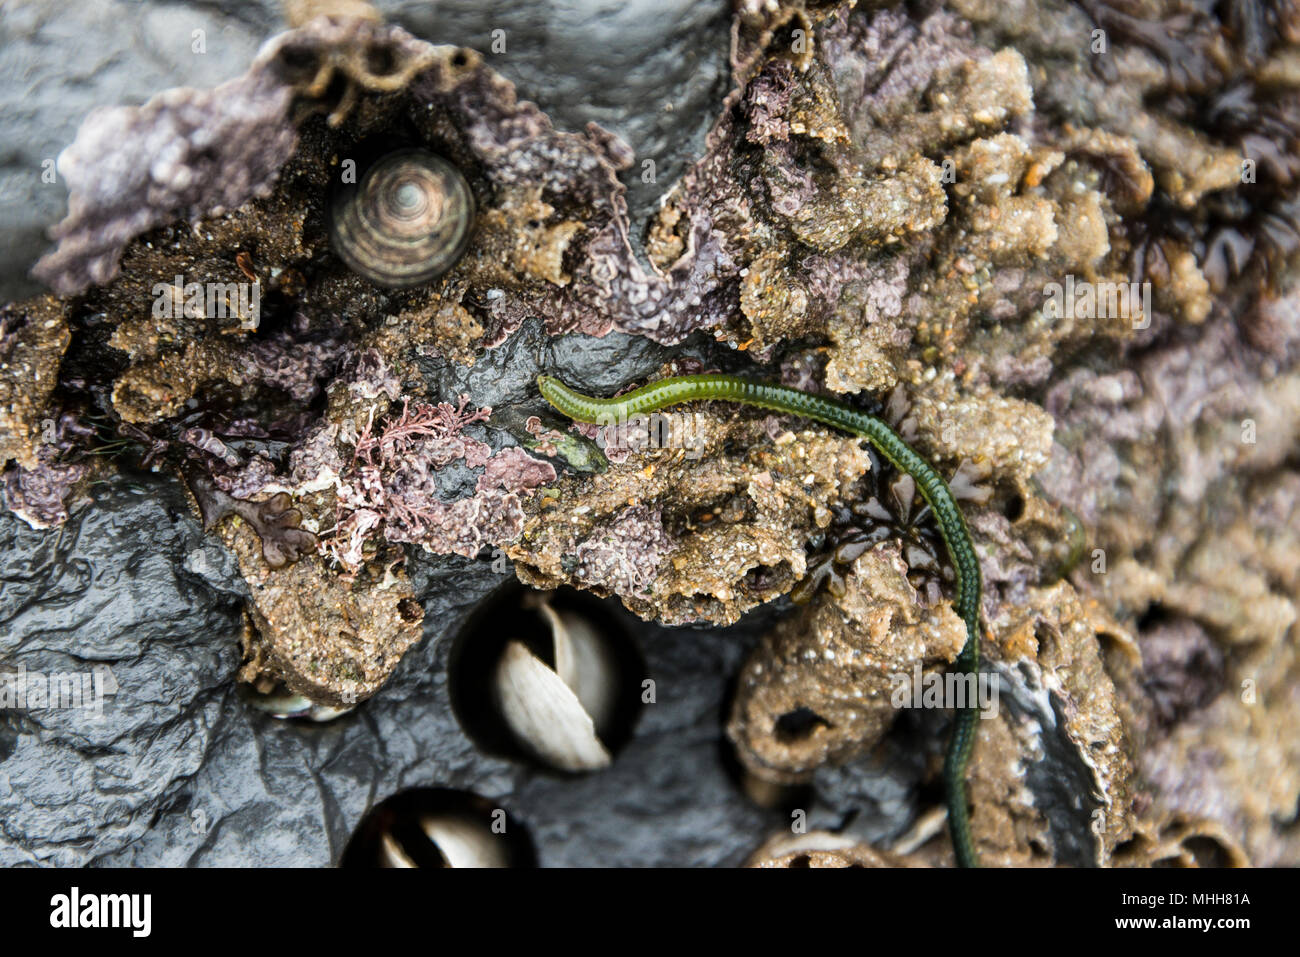 A green-leaf worm (Eulalia viridis) on rocks containing piddocks (Pholadidae sp.) in their bore holes Stock Photo